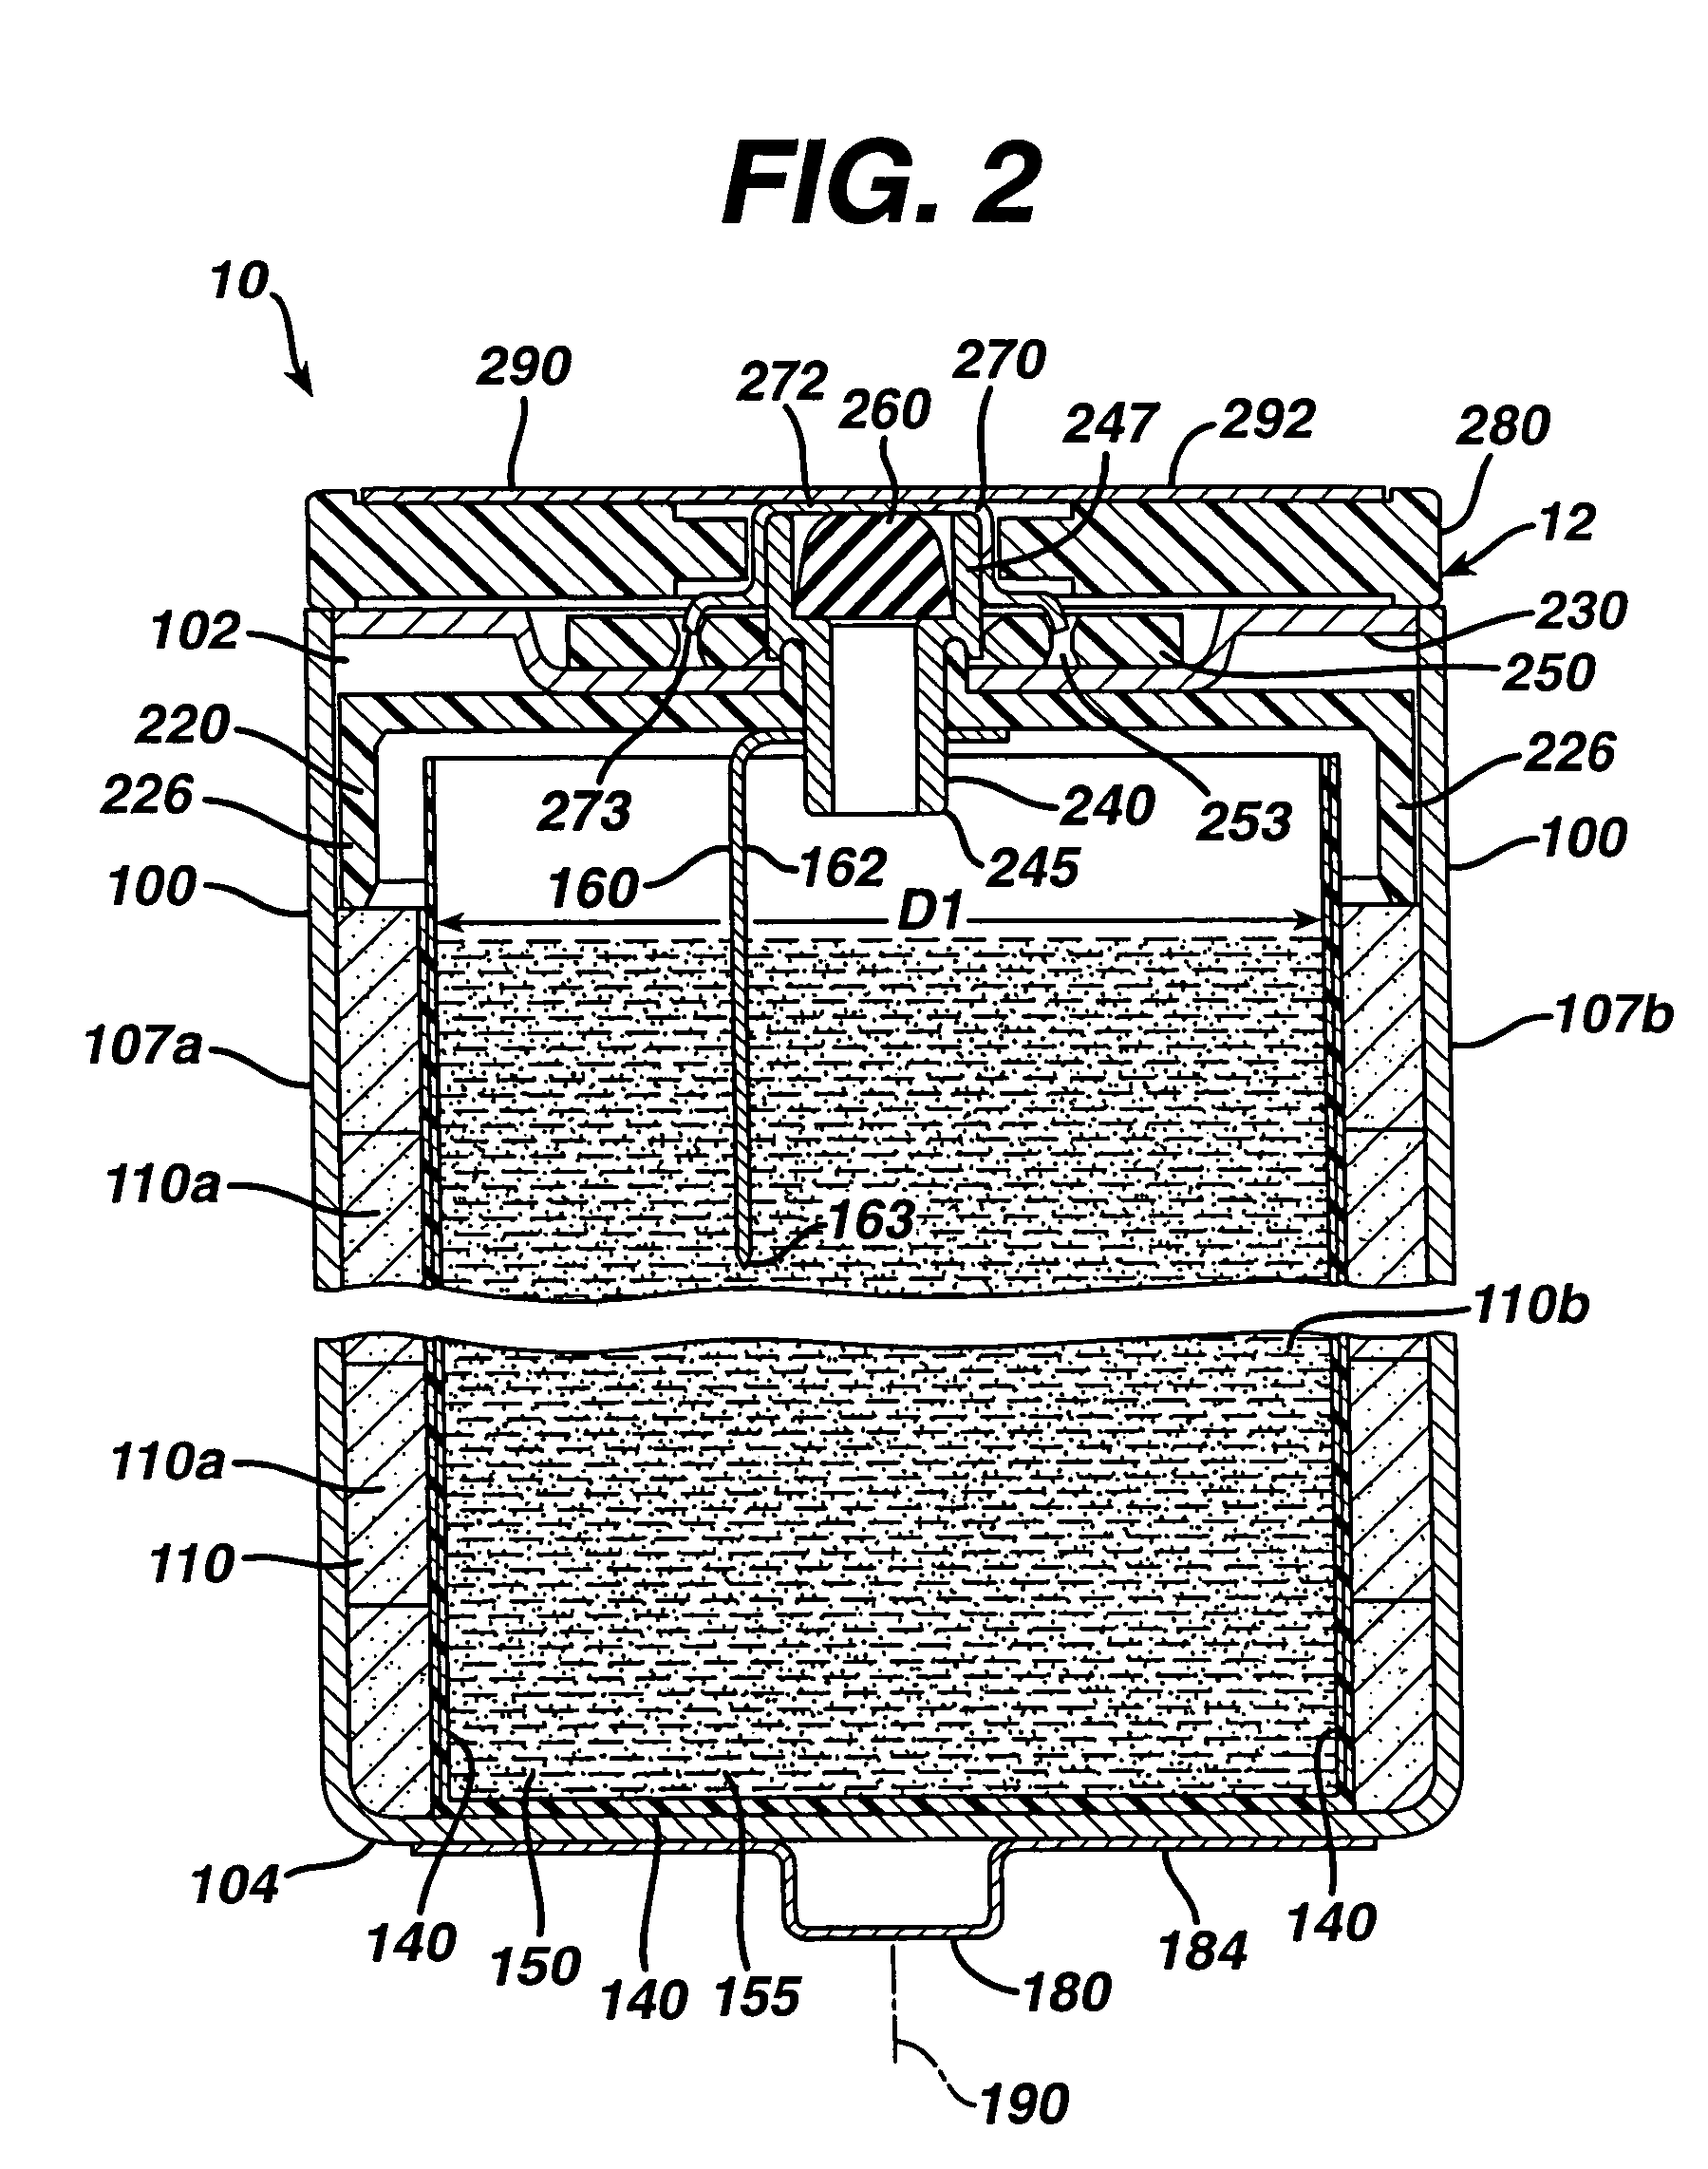 Alkaline cell with flat housing